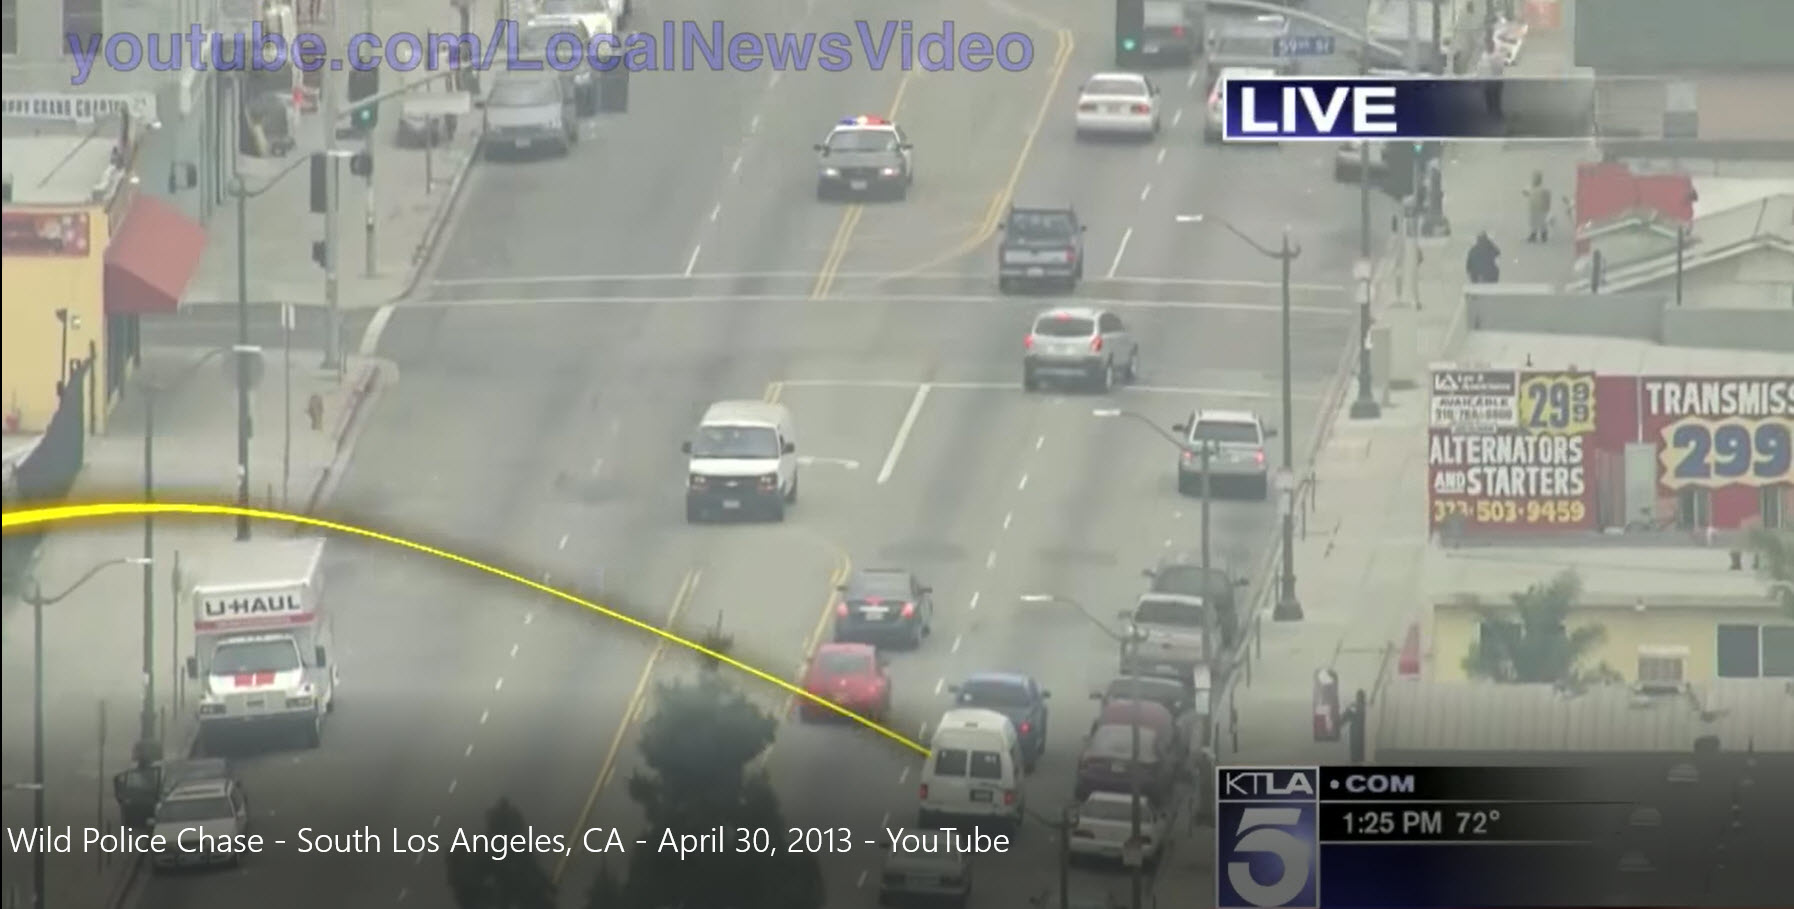 (Click Here to Play Video) Same LAPD pursuit in South Central LA – Channel 5 news view